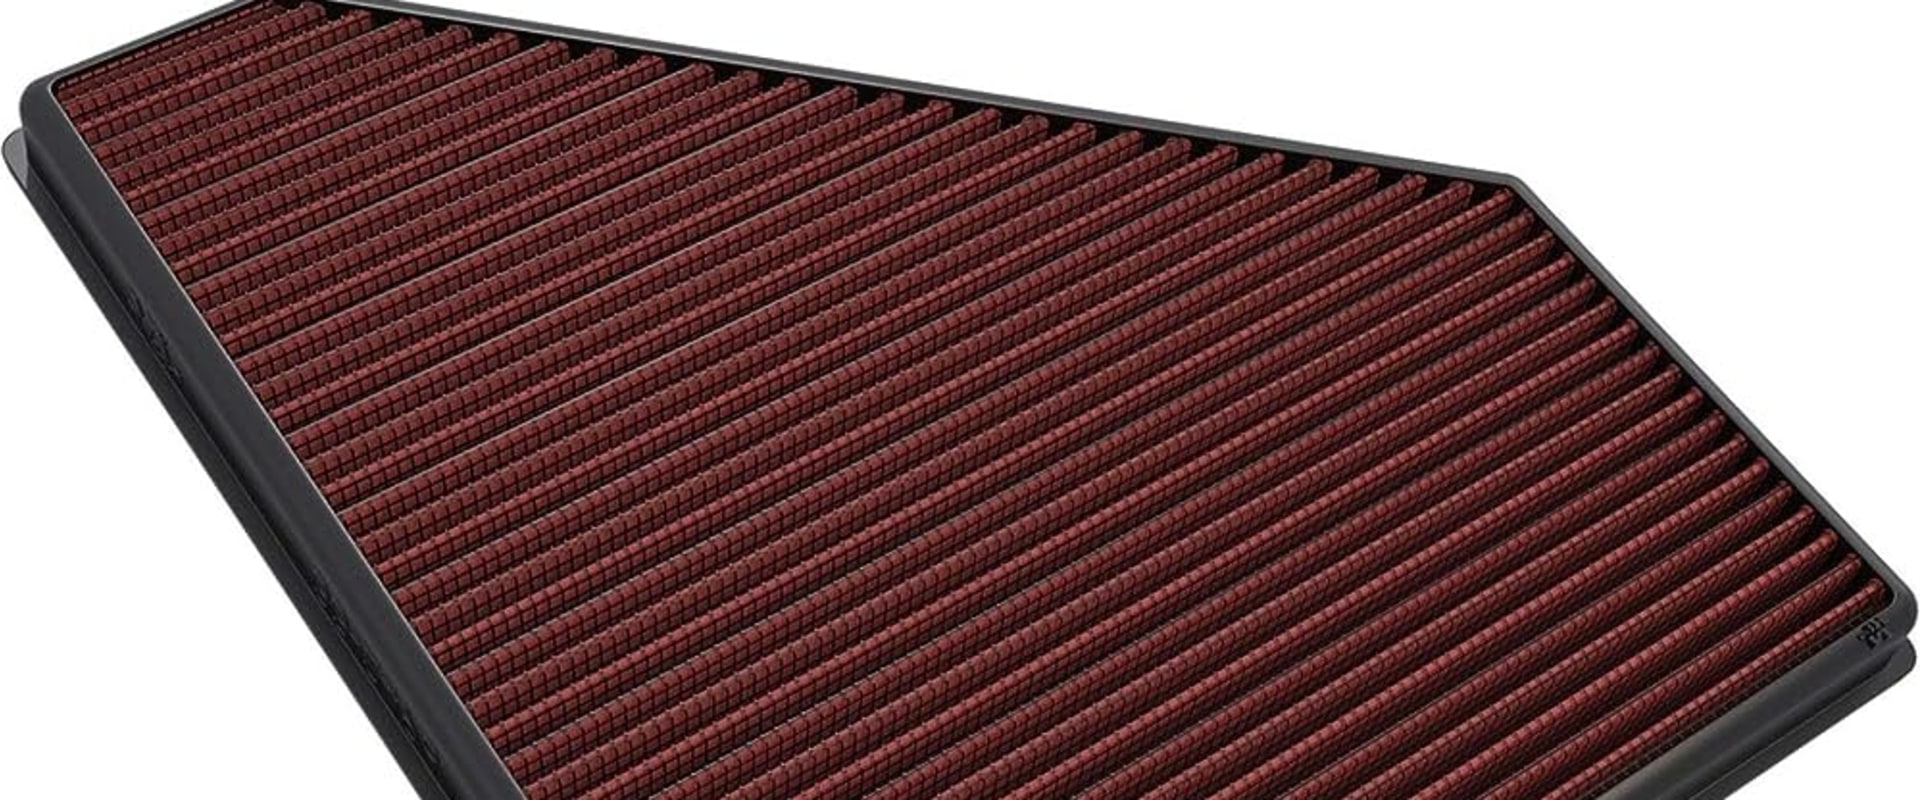 Is it Worth Investing in a Premium Air Filter?